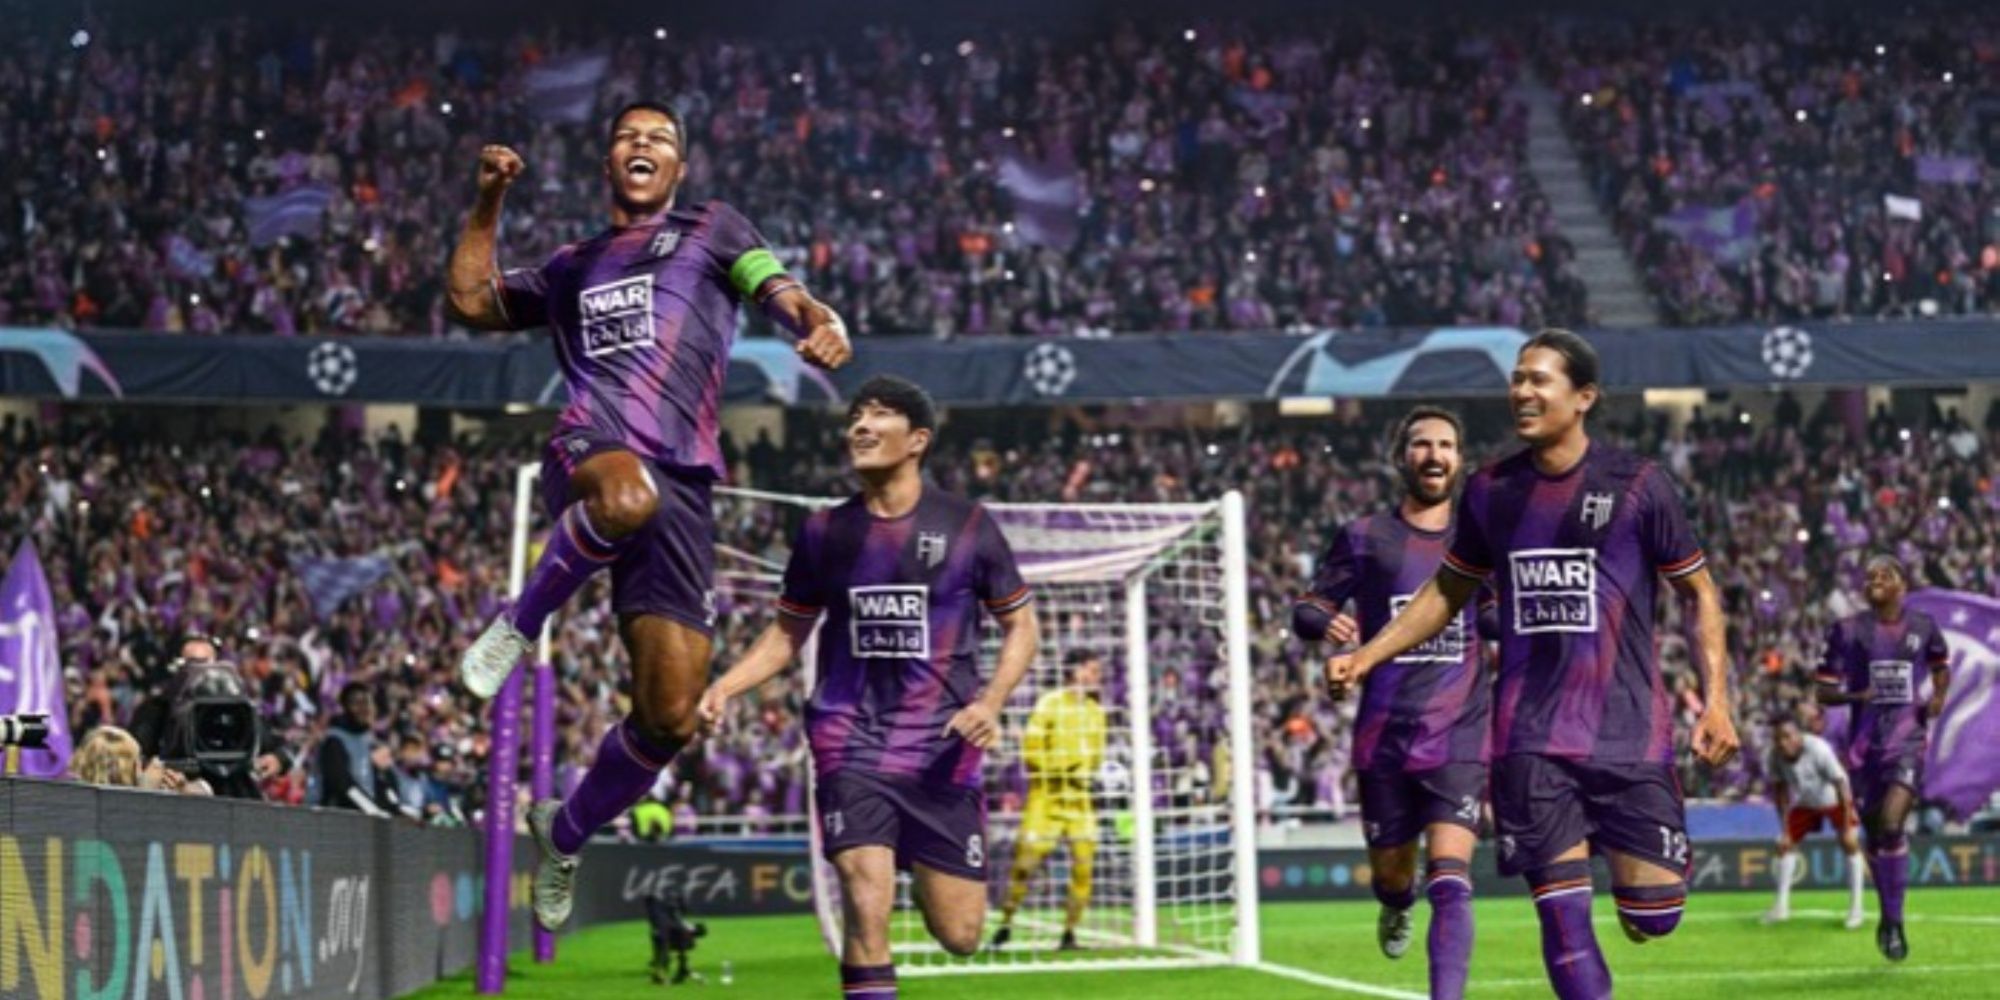 Football Manager 2024, Cover Image Of The FMFC Players Celebrating A Goal-1